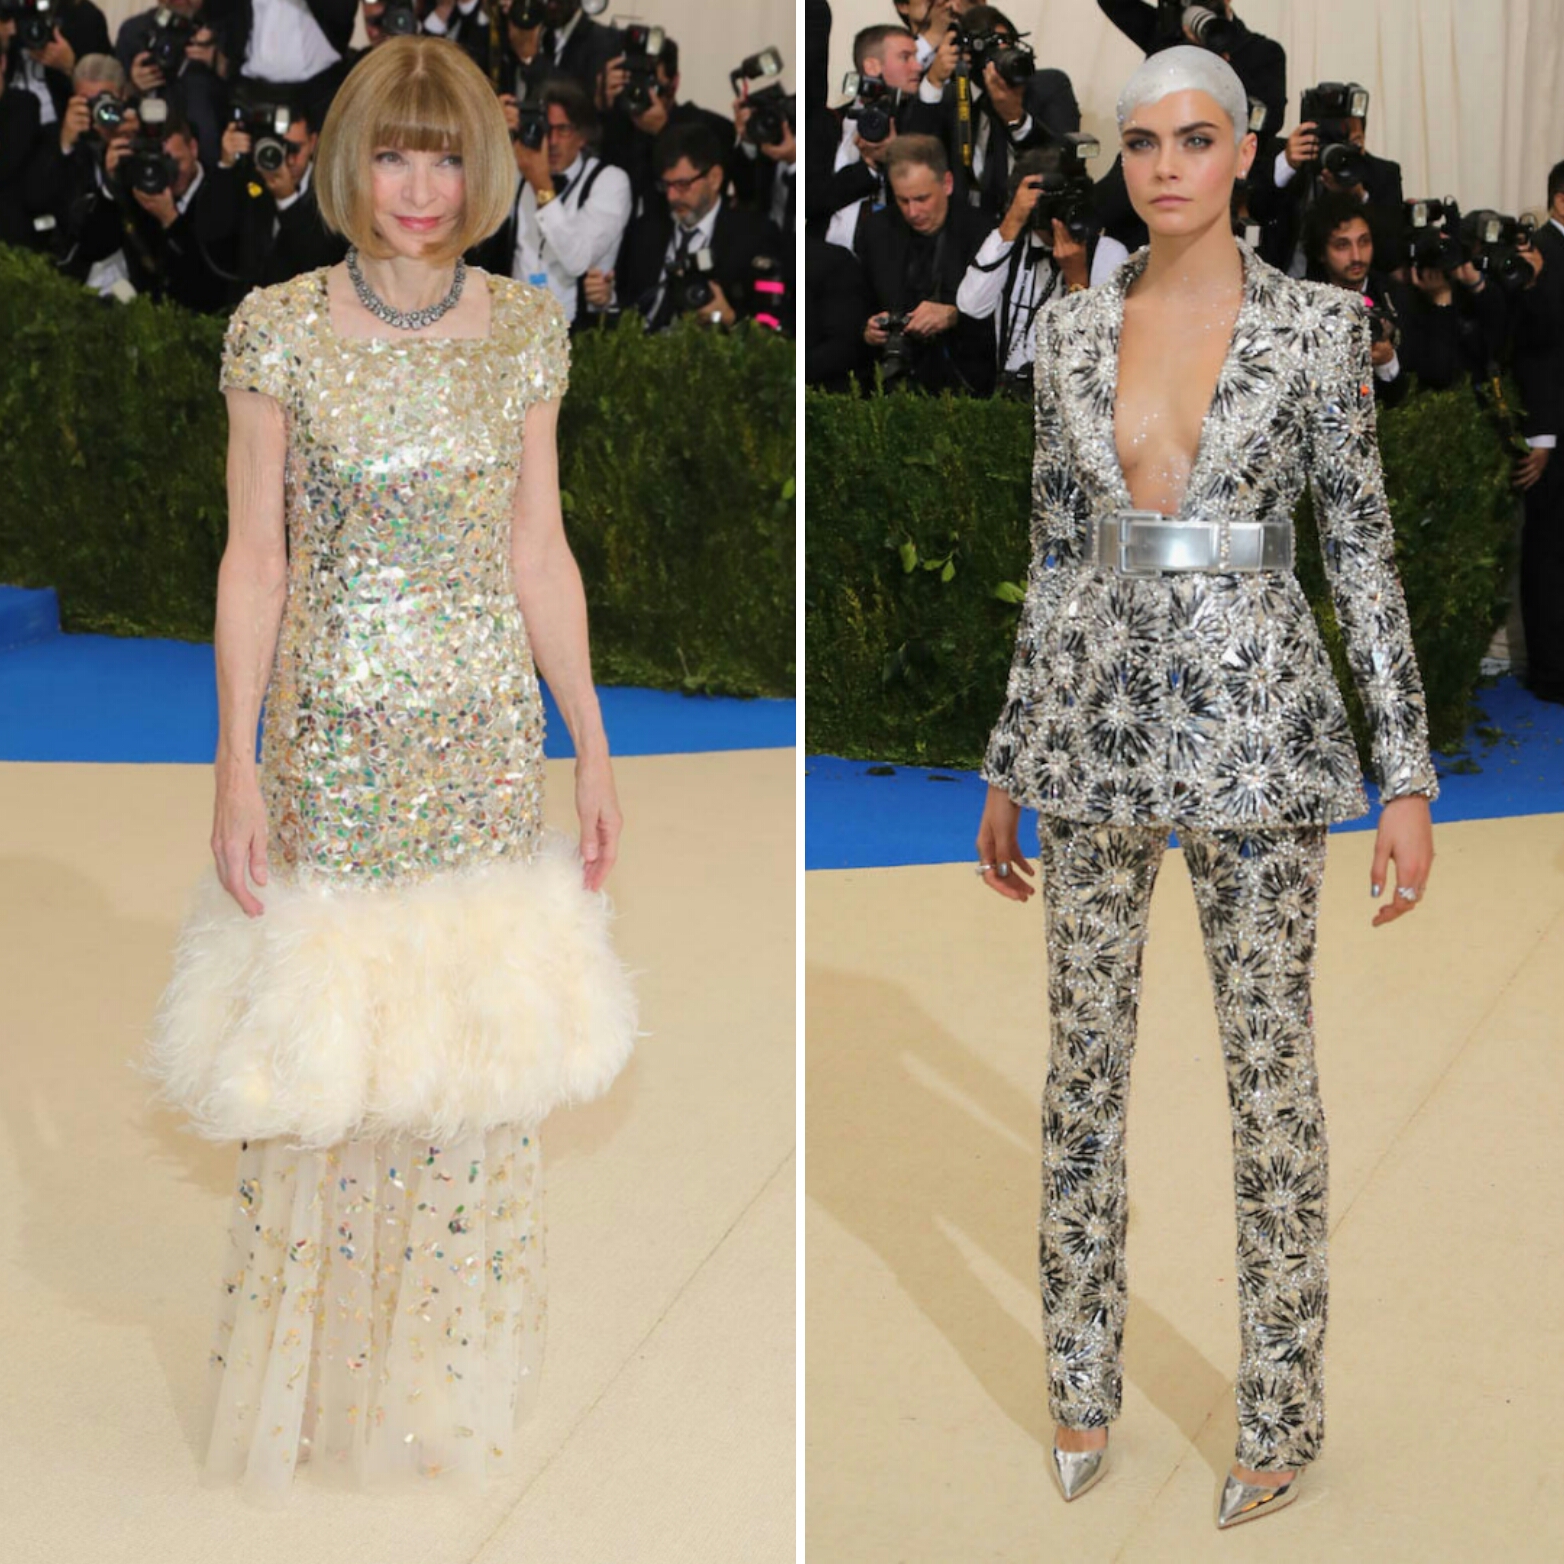 The host of the Met Gala, Anna Wintour, and Cara Delevinge dressed in Chanel